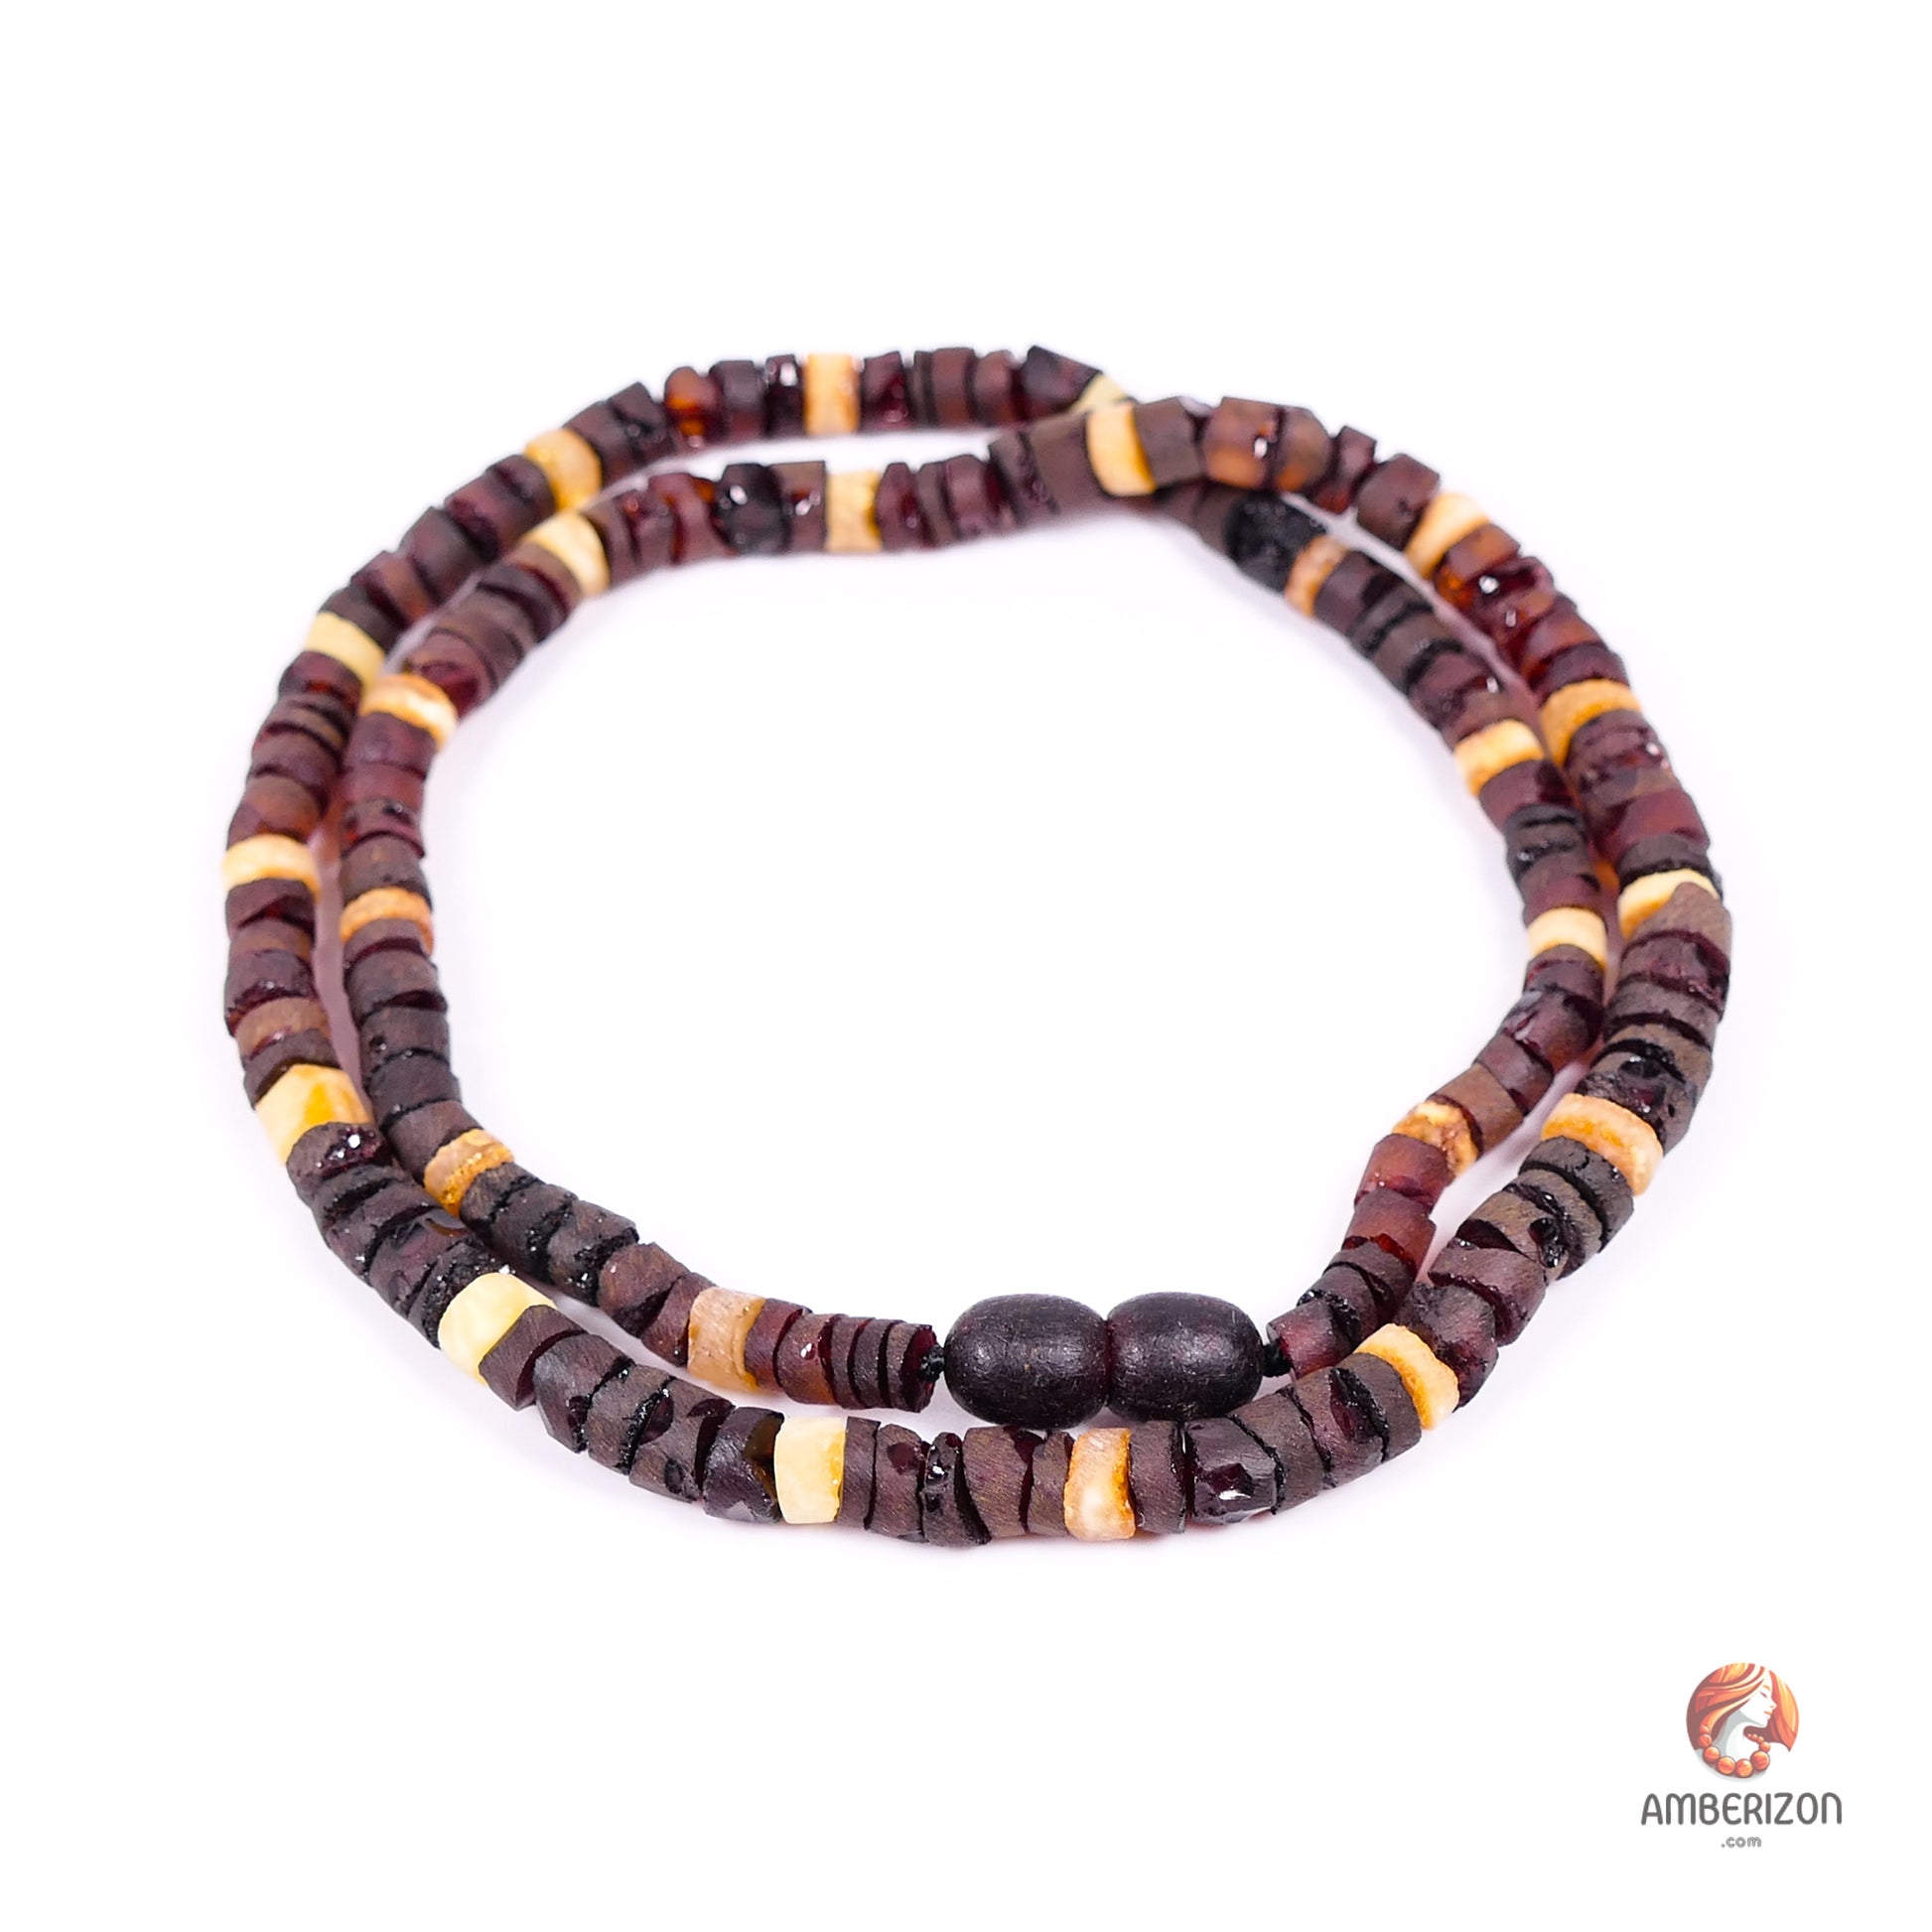 Women's necklace - Cylinder unpolished amber beads in cherry and butterscotch colors